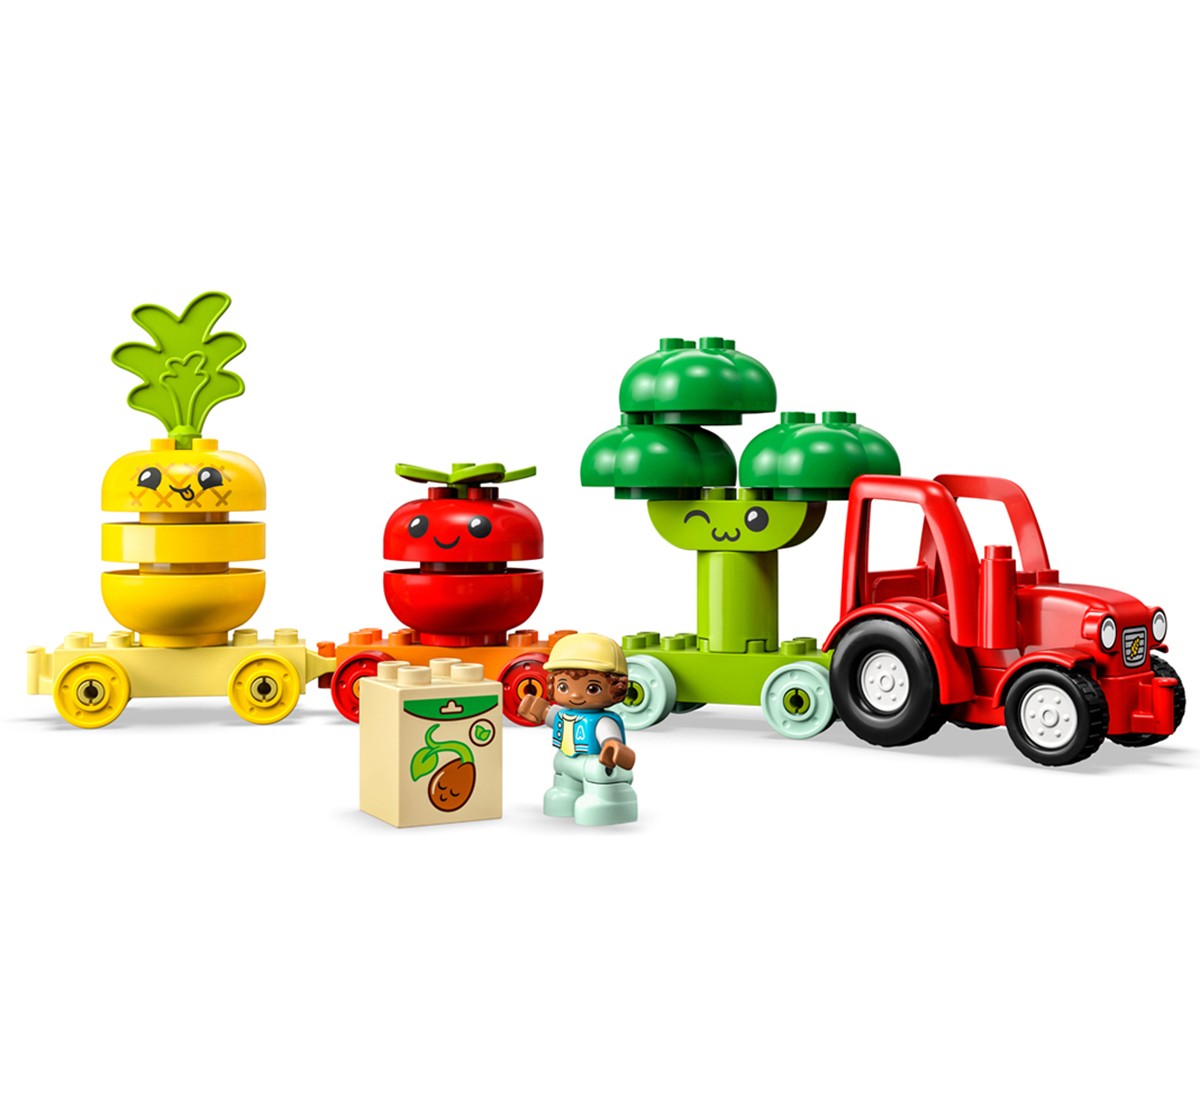 LEGO DUPLO My First Fruit and Vegetable Tractor 10982 Building Toy Set 19 Pieces Multicolour 1M+